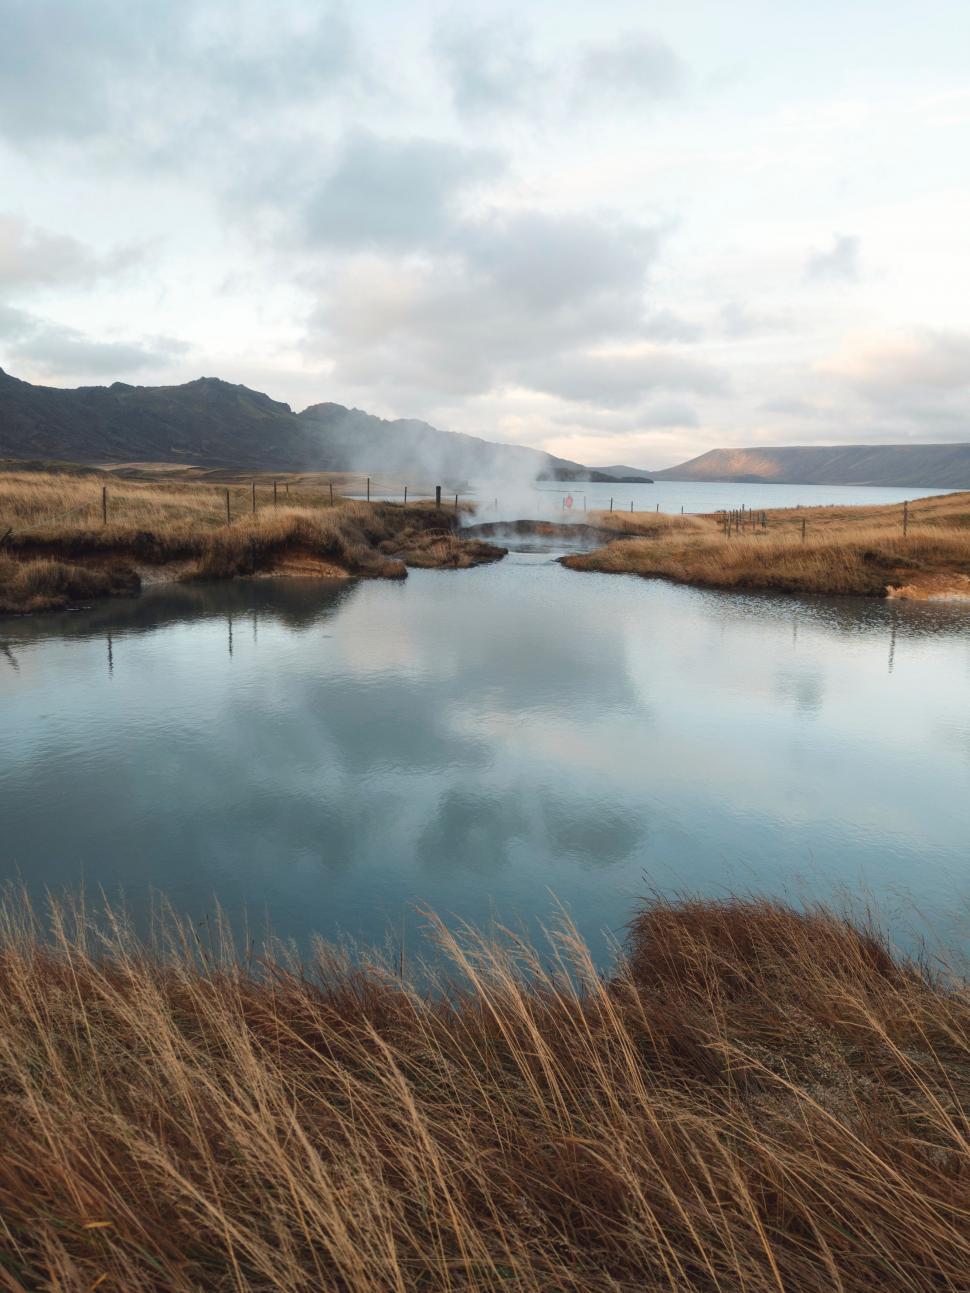 Free Image of Water Body Surrounded by Dry Grass 